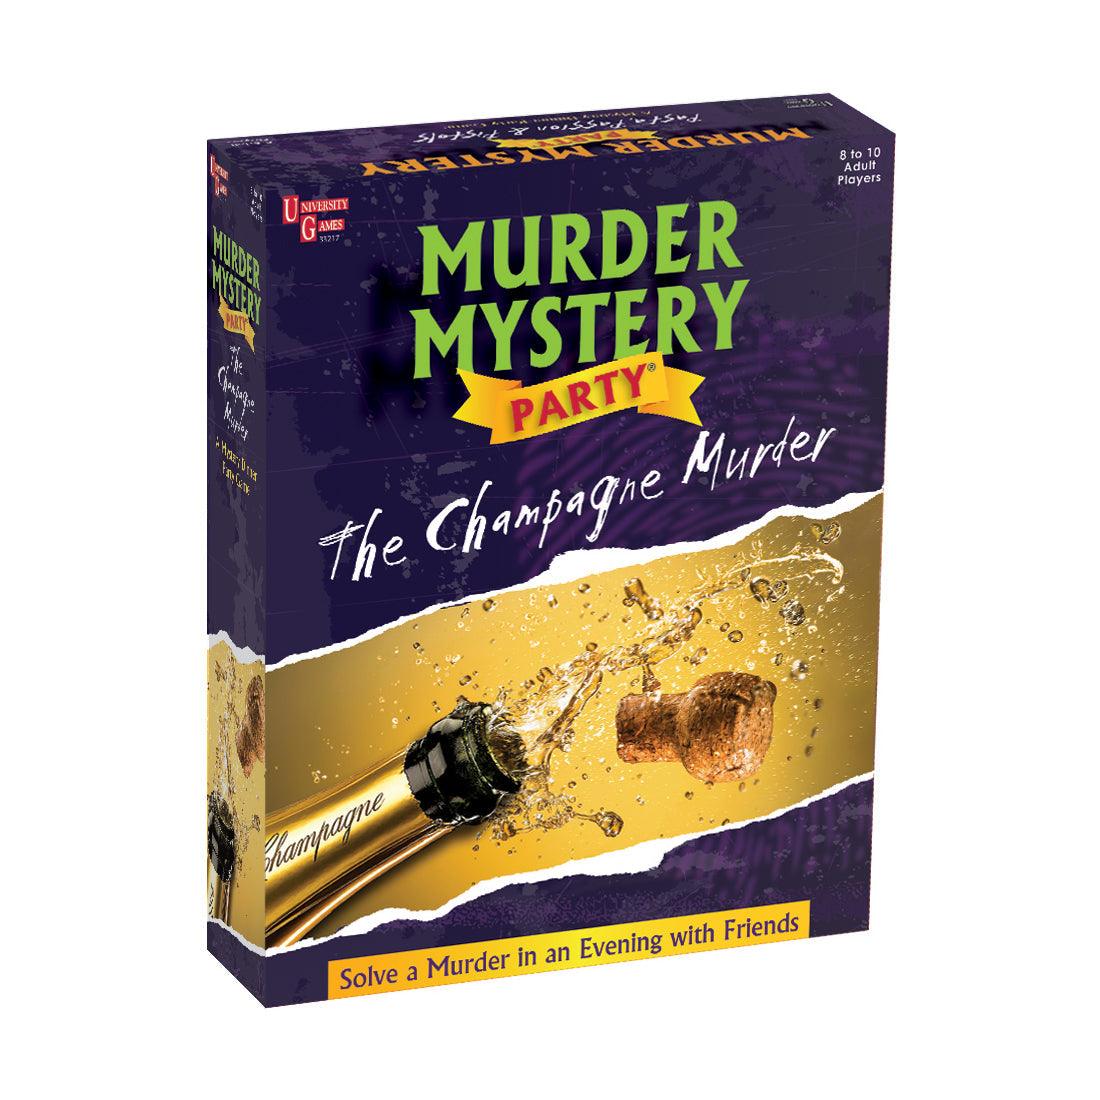 Murder Mystery Party - The champagne Murder (Ang) - La Ribouldingue